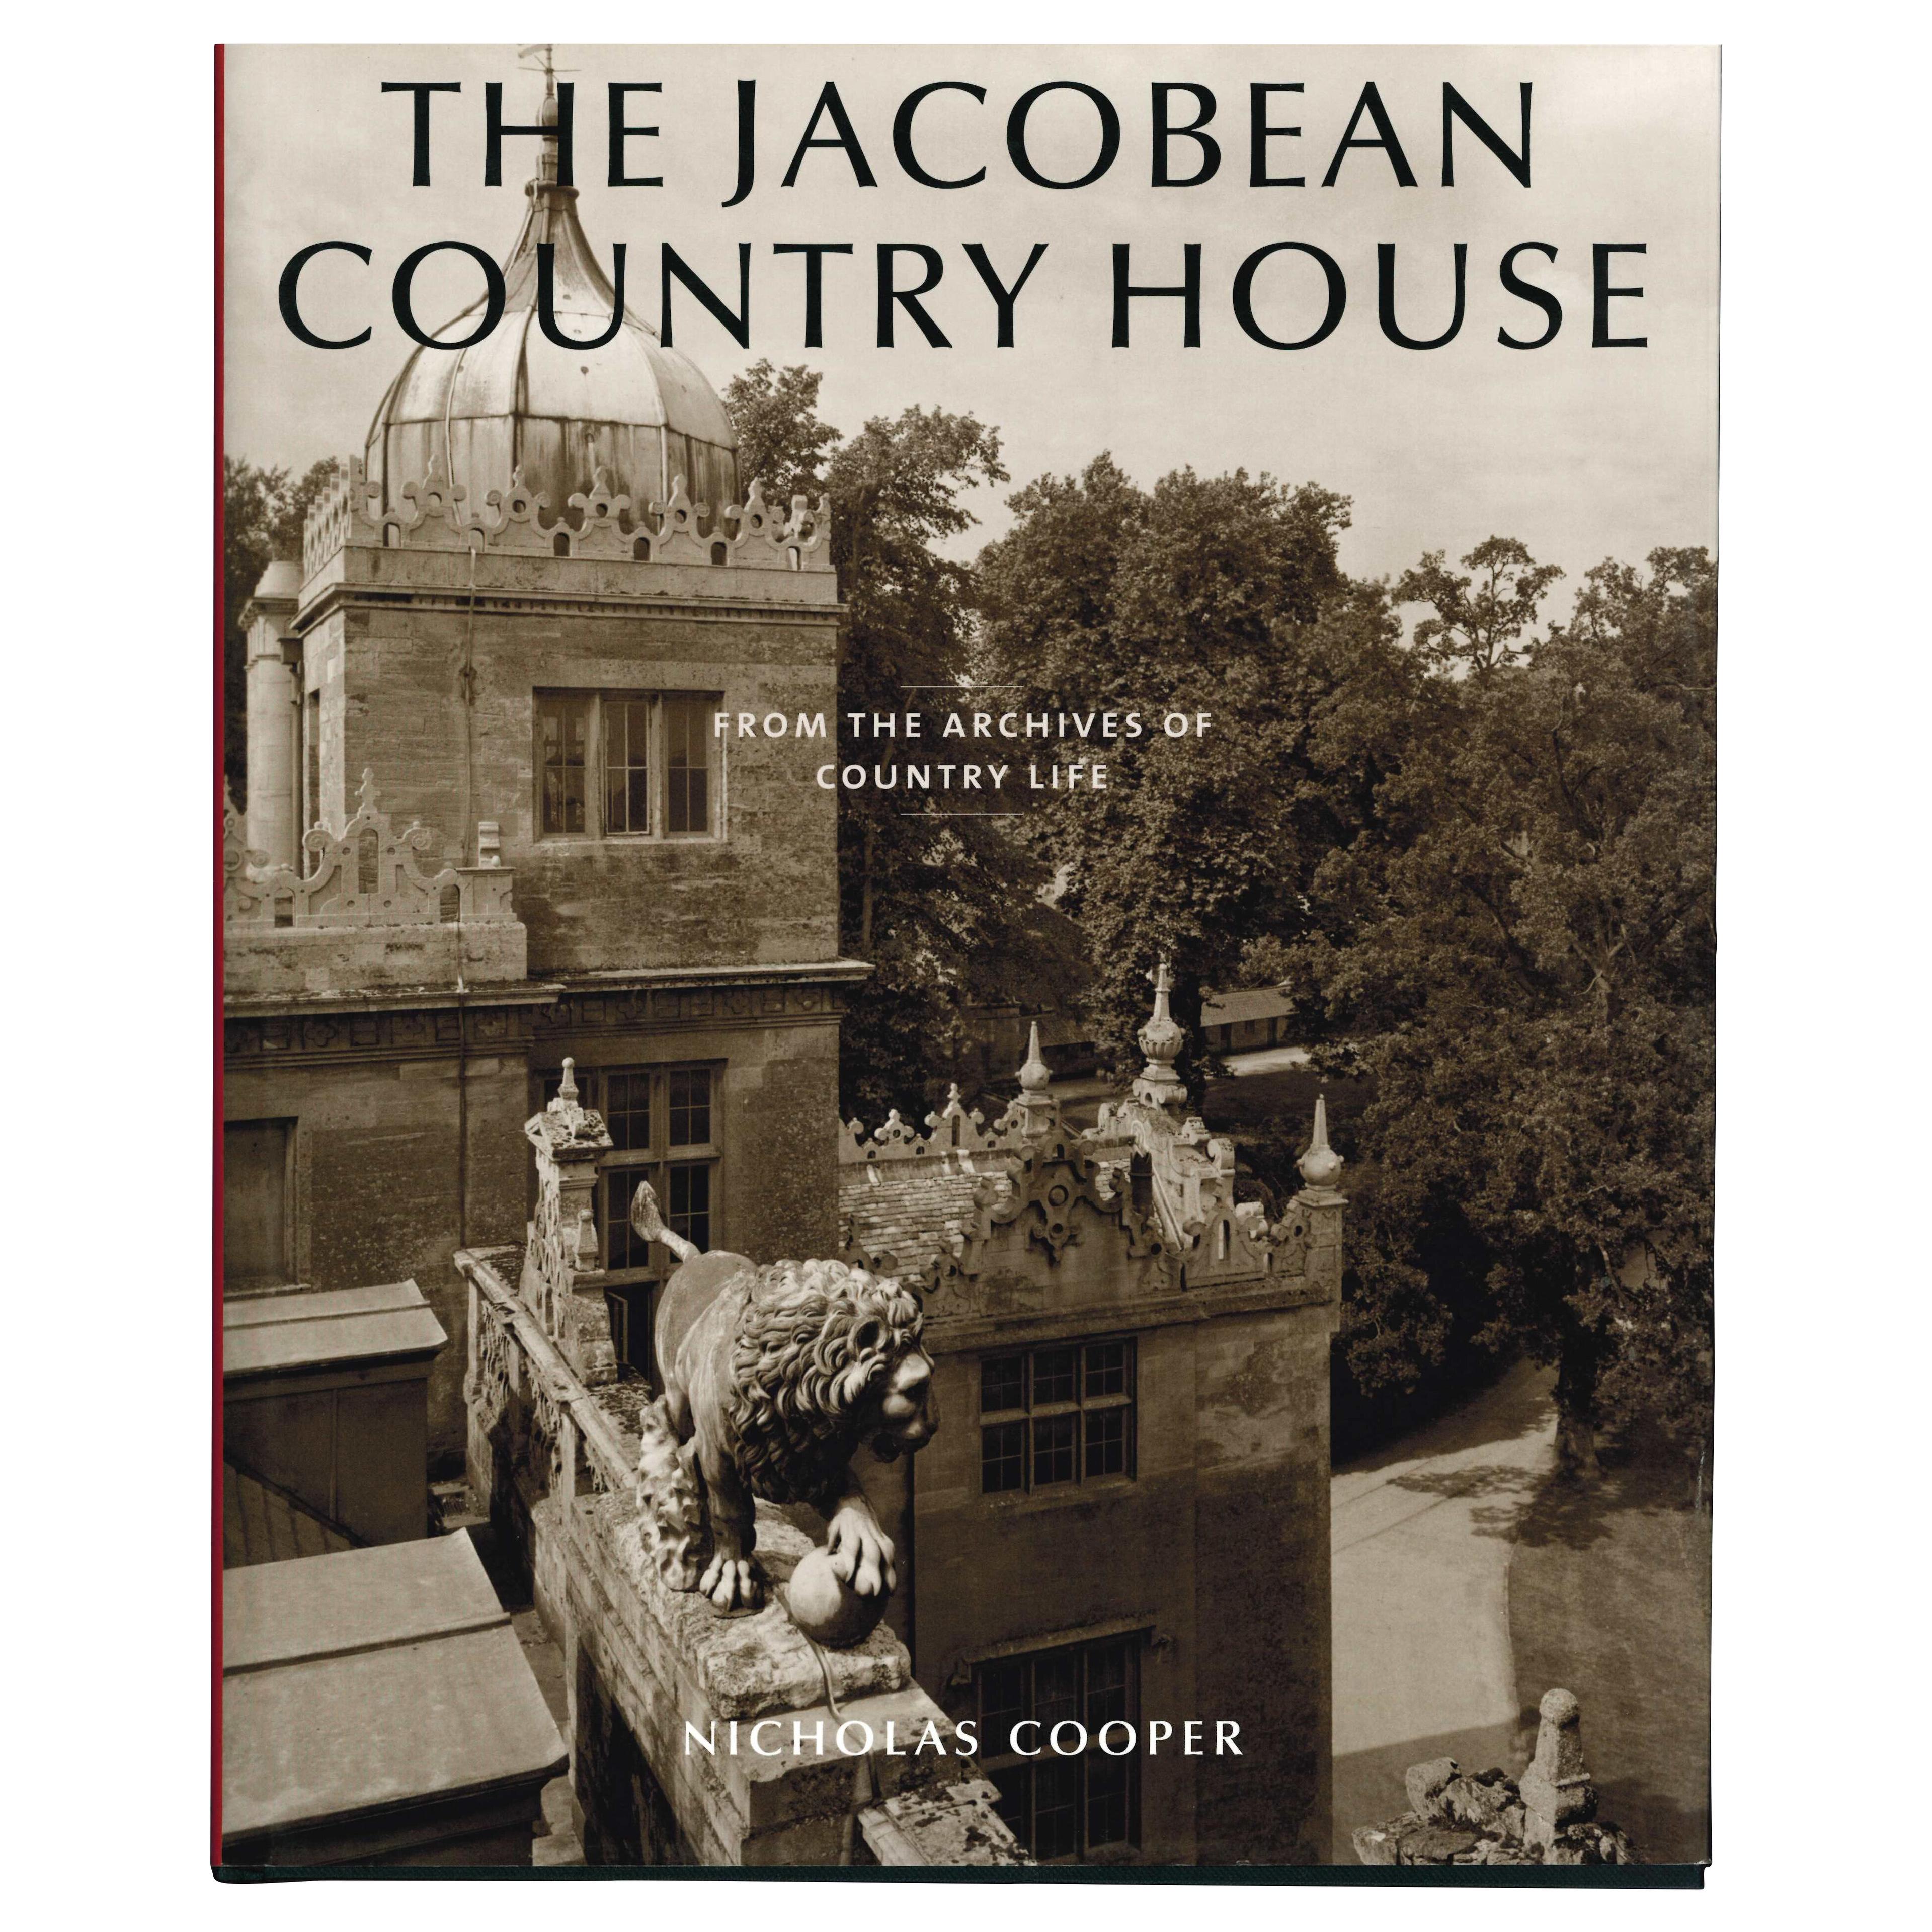 THE JACOBEAN COUNTRY HOUSE. Book